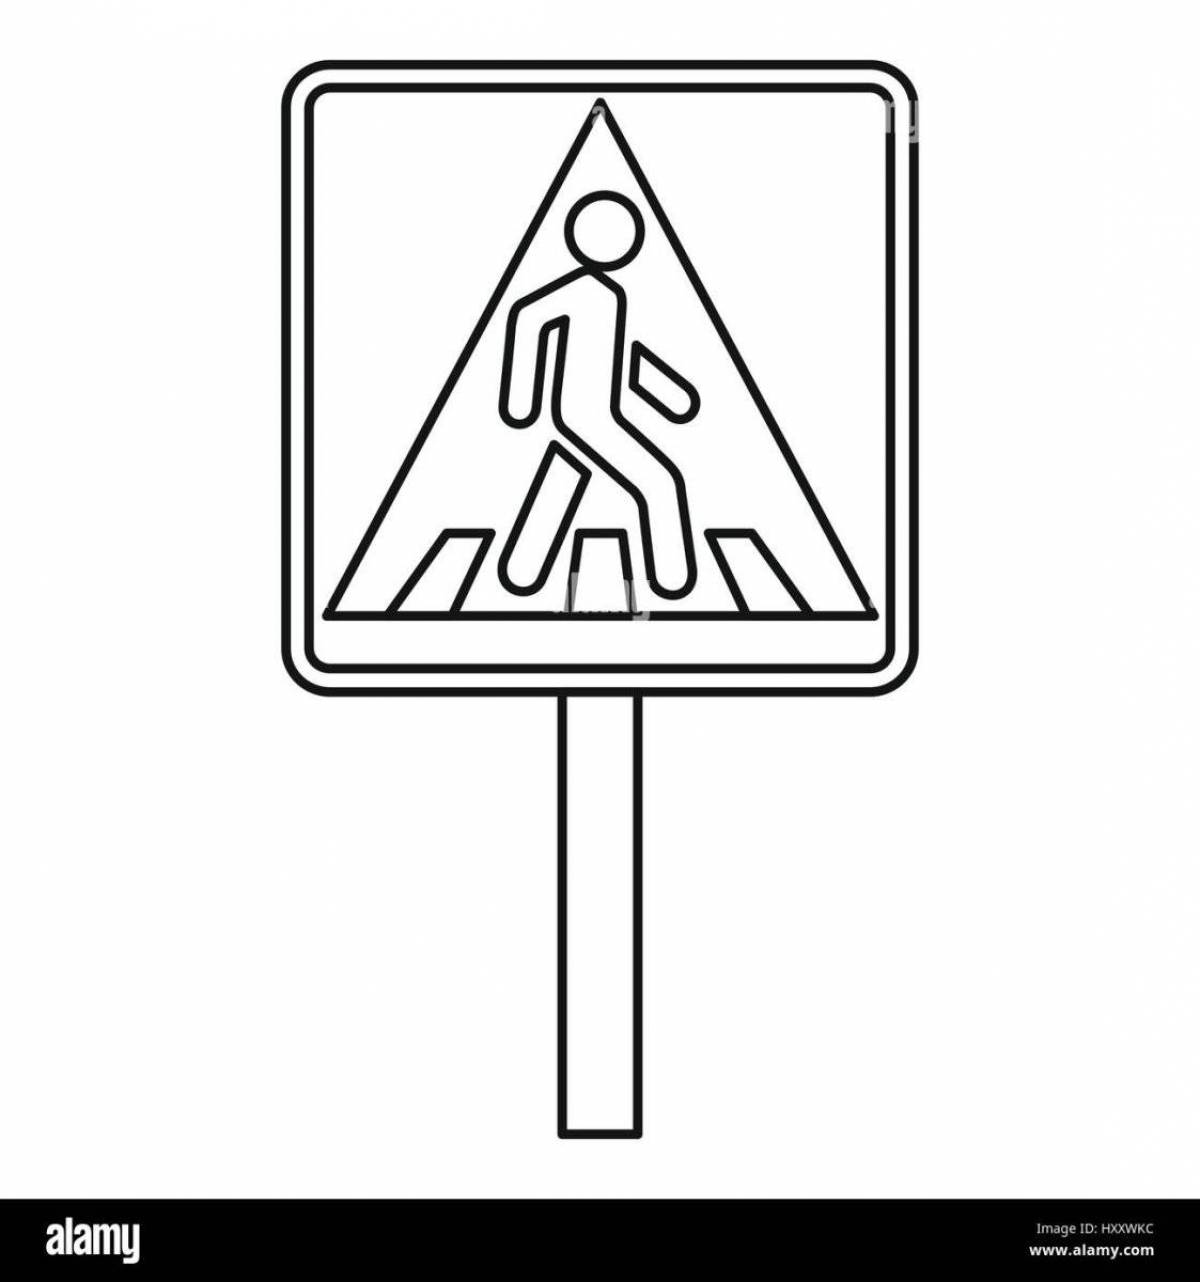 Crossing sign #6